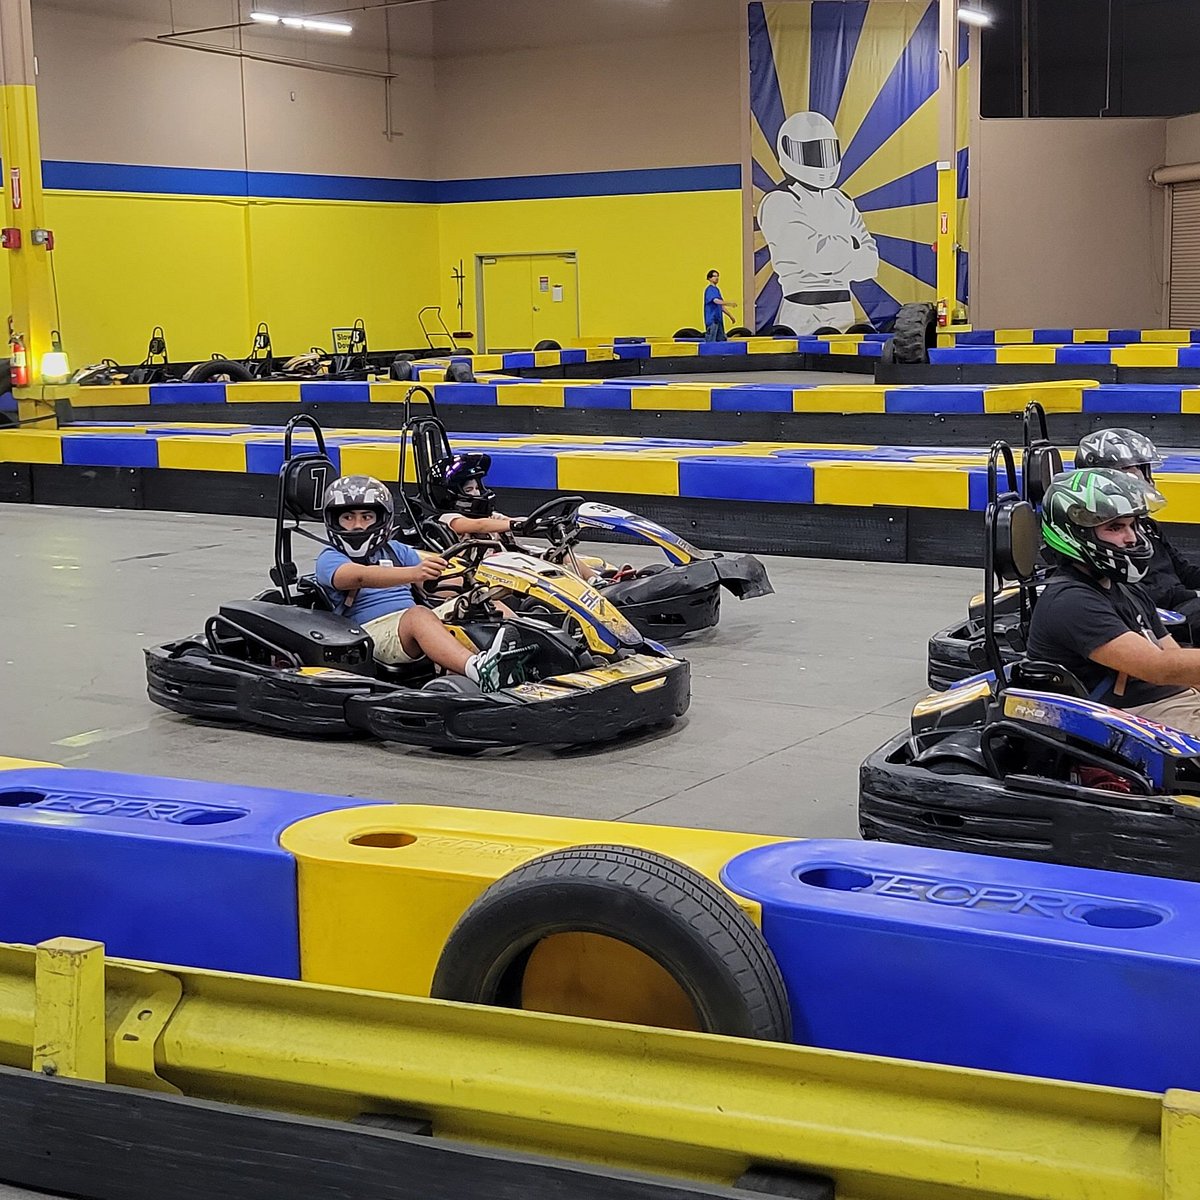 Speed racer and Go-Karts, ice cream, weekend vibes and more. Weekly zvolg